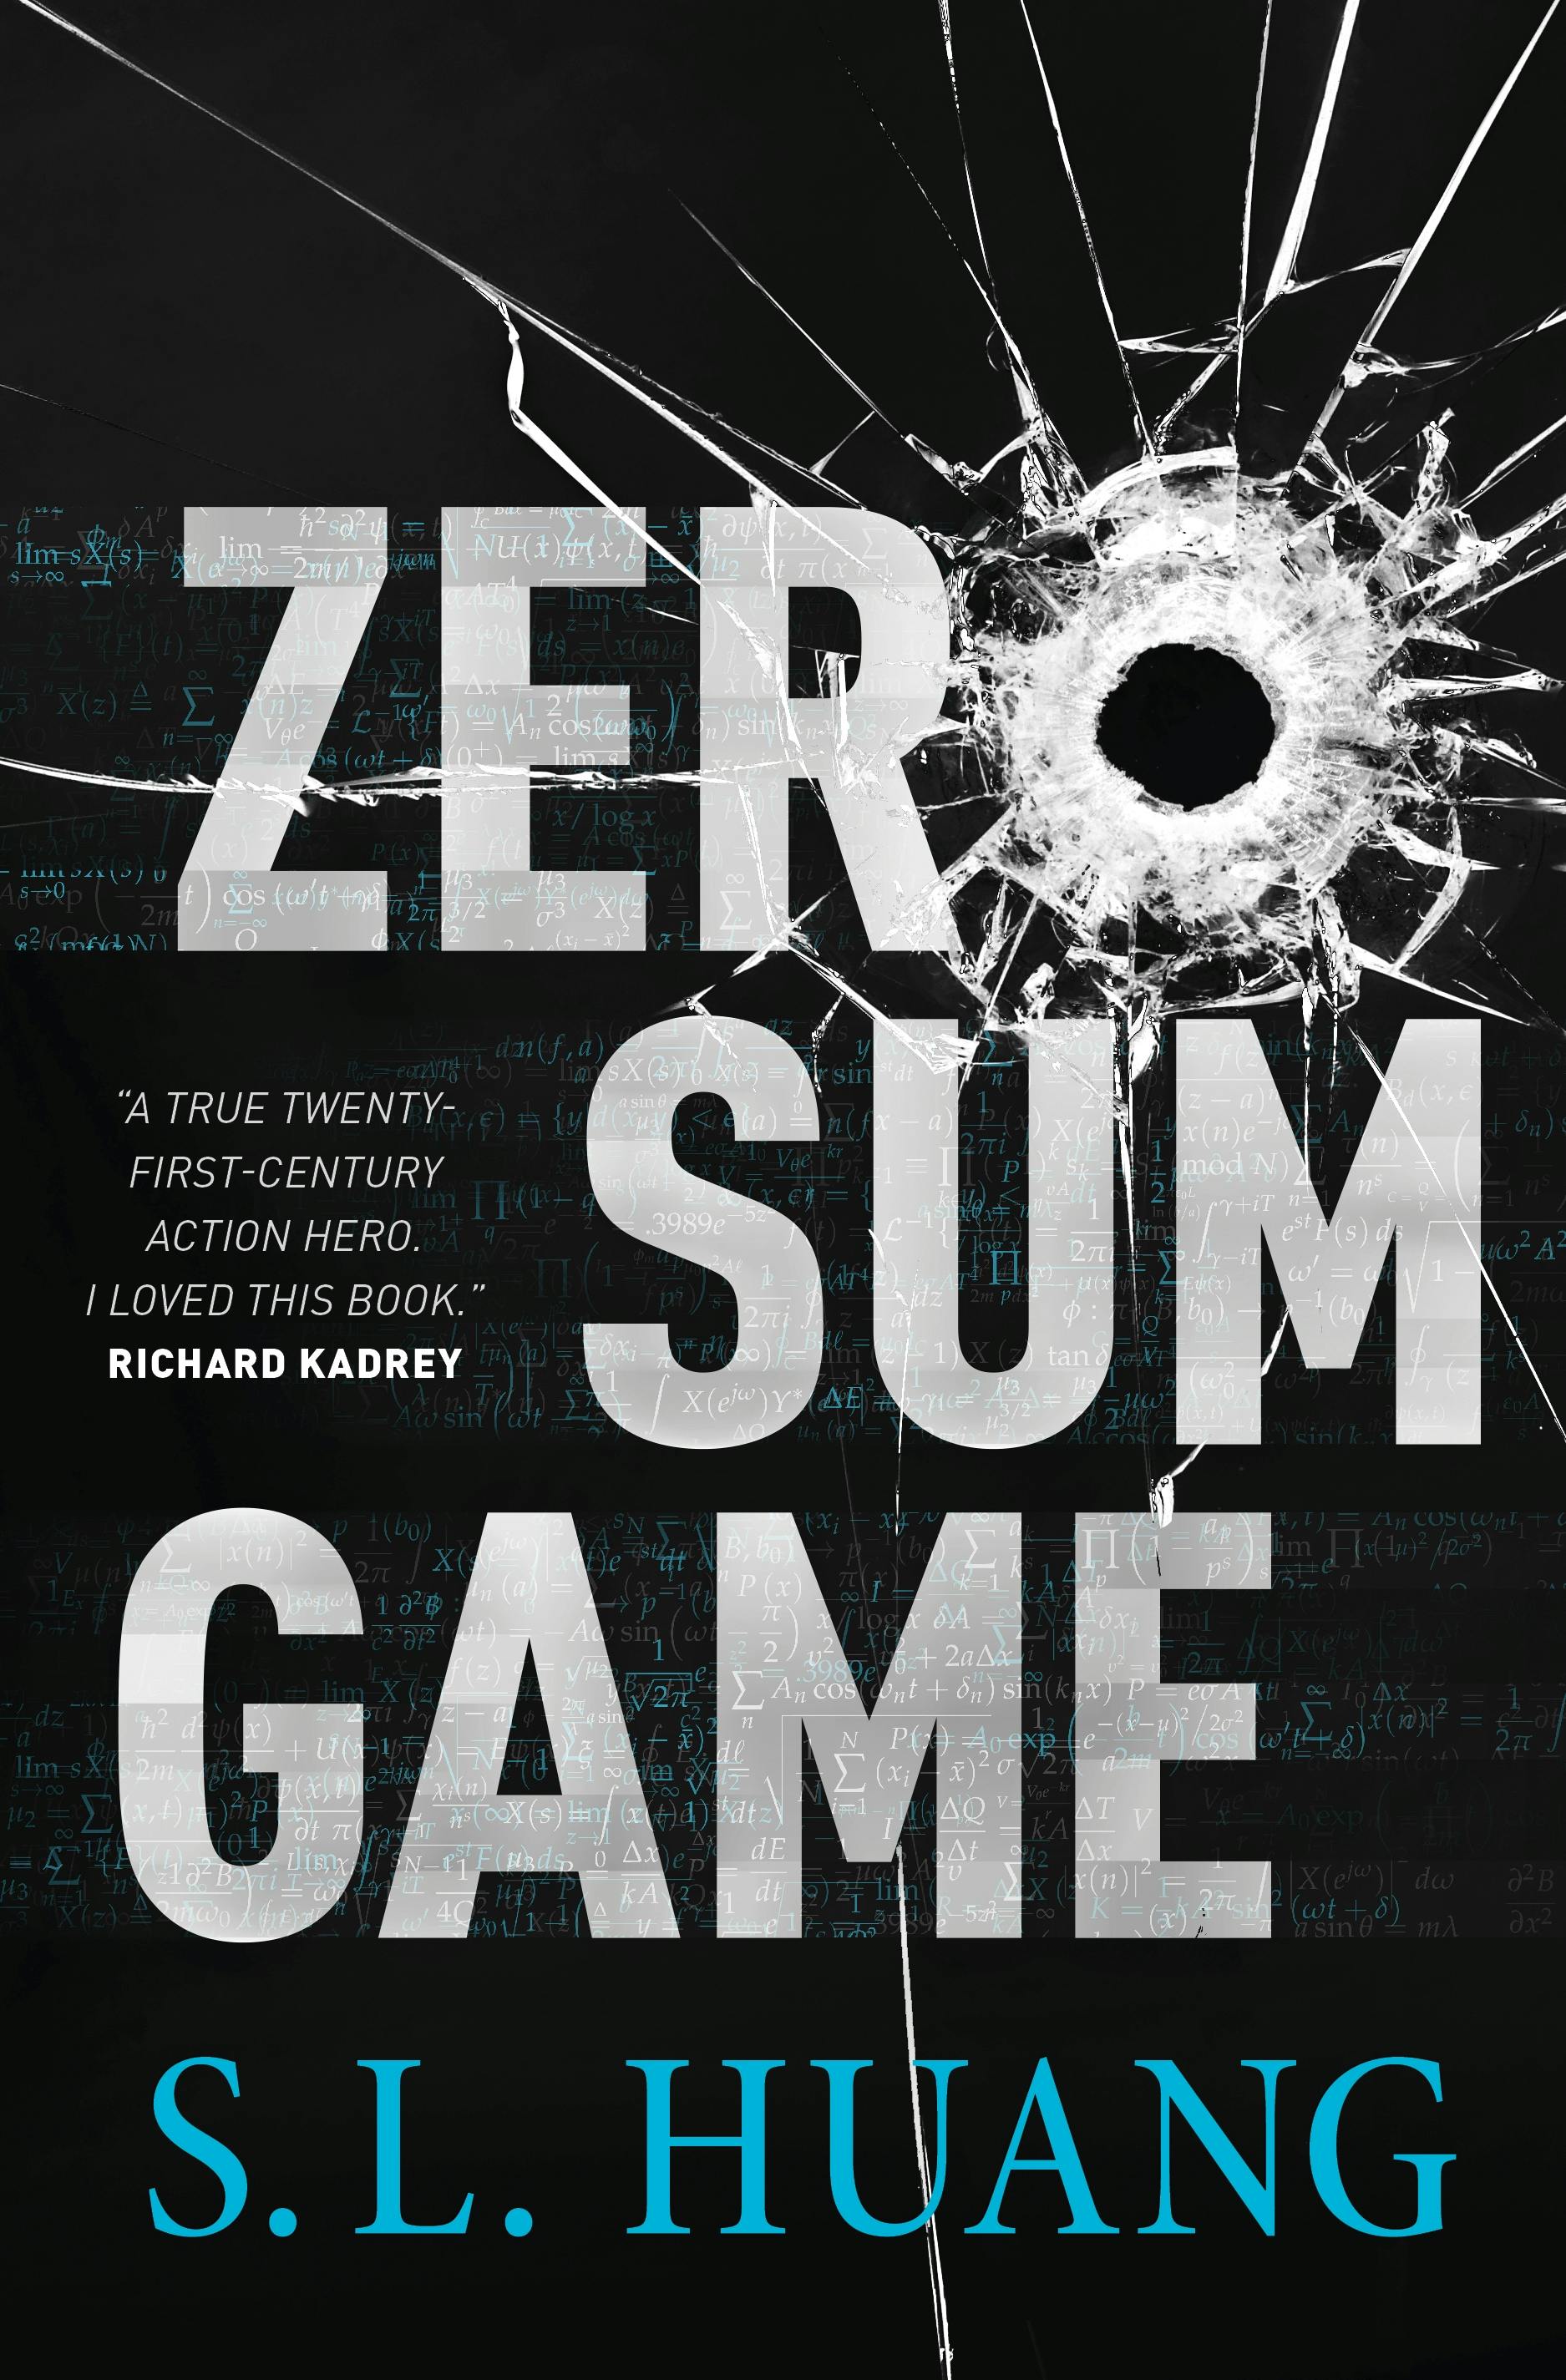 Cover for the book titled as: Zero Sum Game